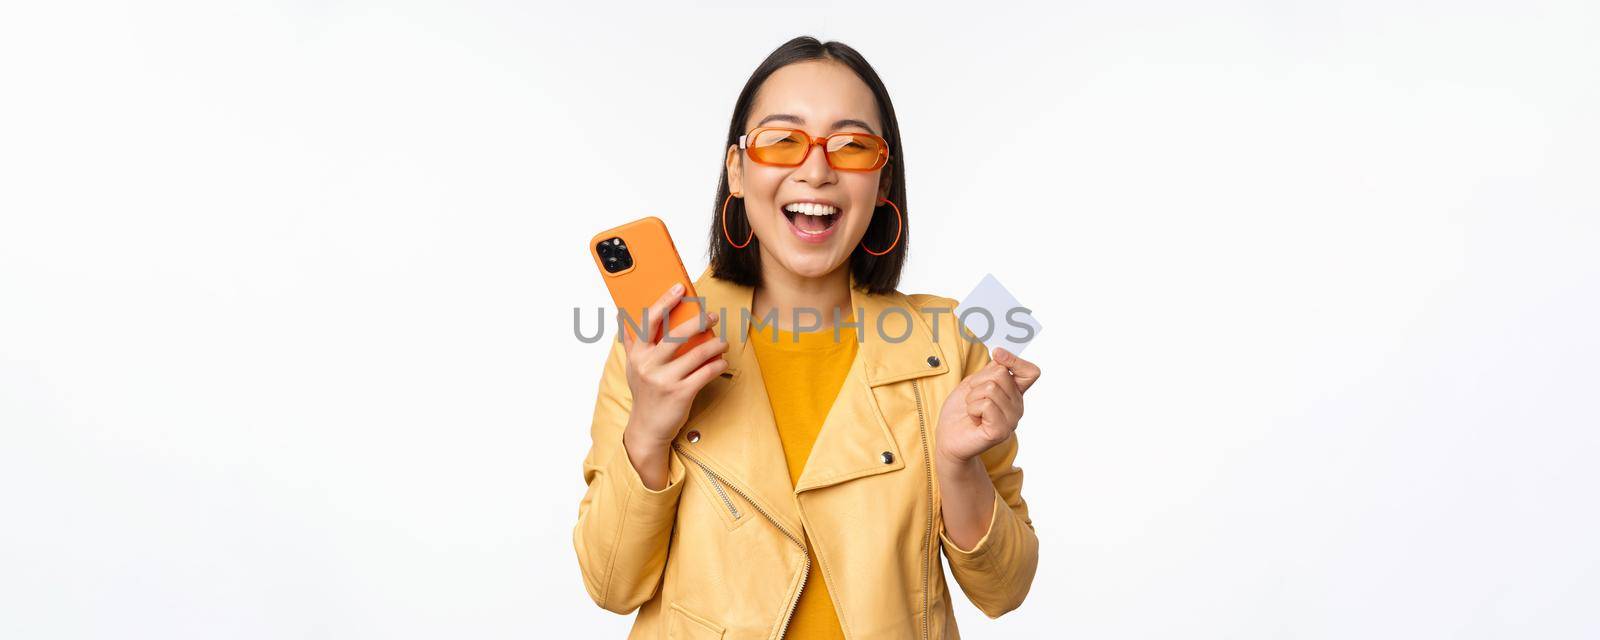 Online shopping and delivery concept. Happy korean girl in stylish clothes, holding credit card and smartphone, laughing and smiling, standing over white background.